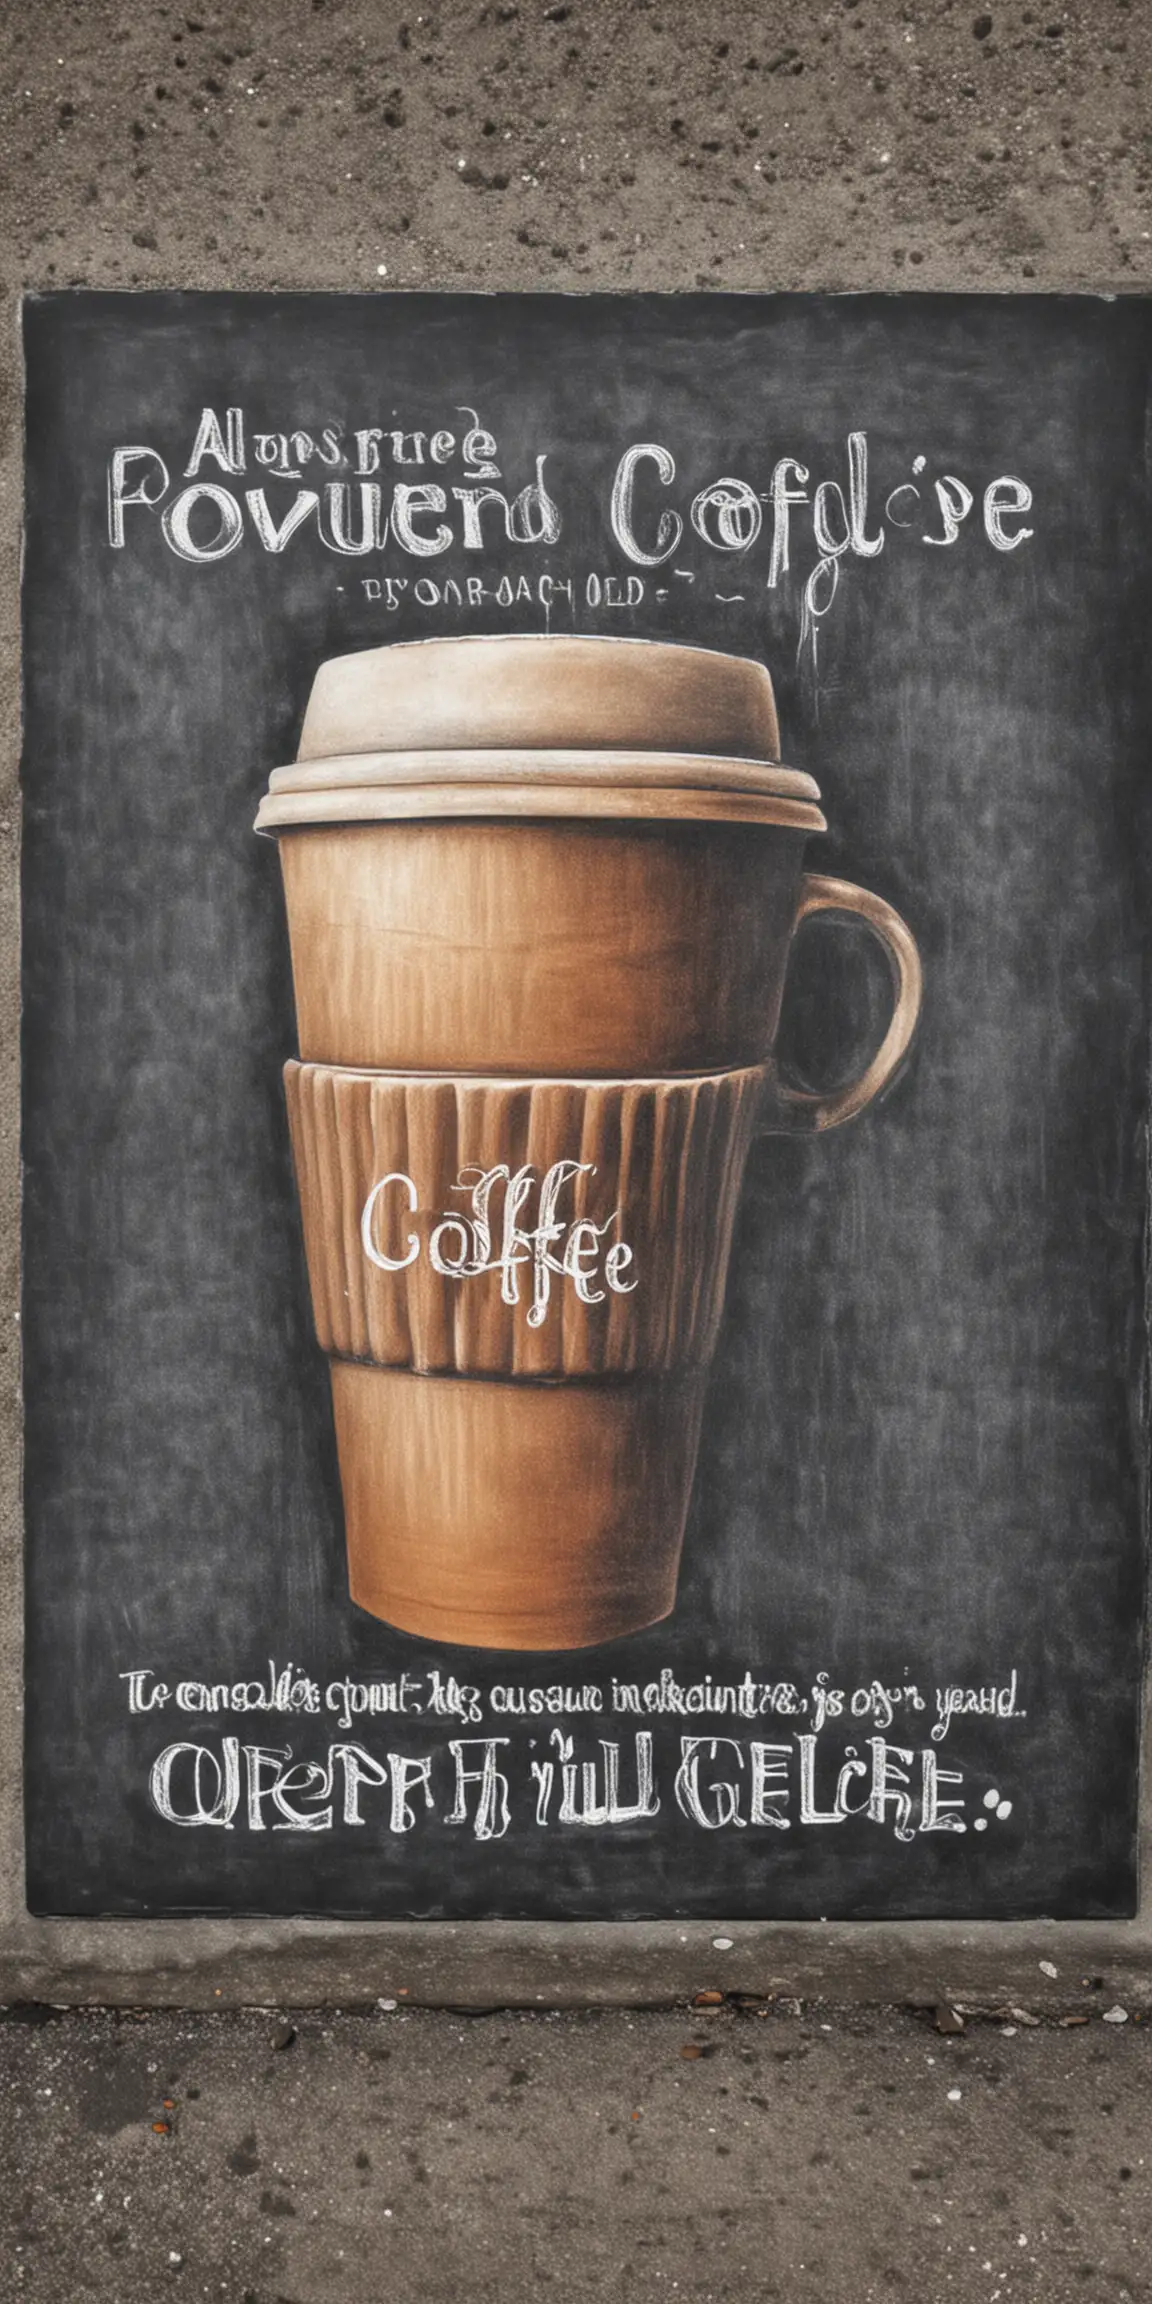 poster in chalk art "Overpriced Coffee"